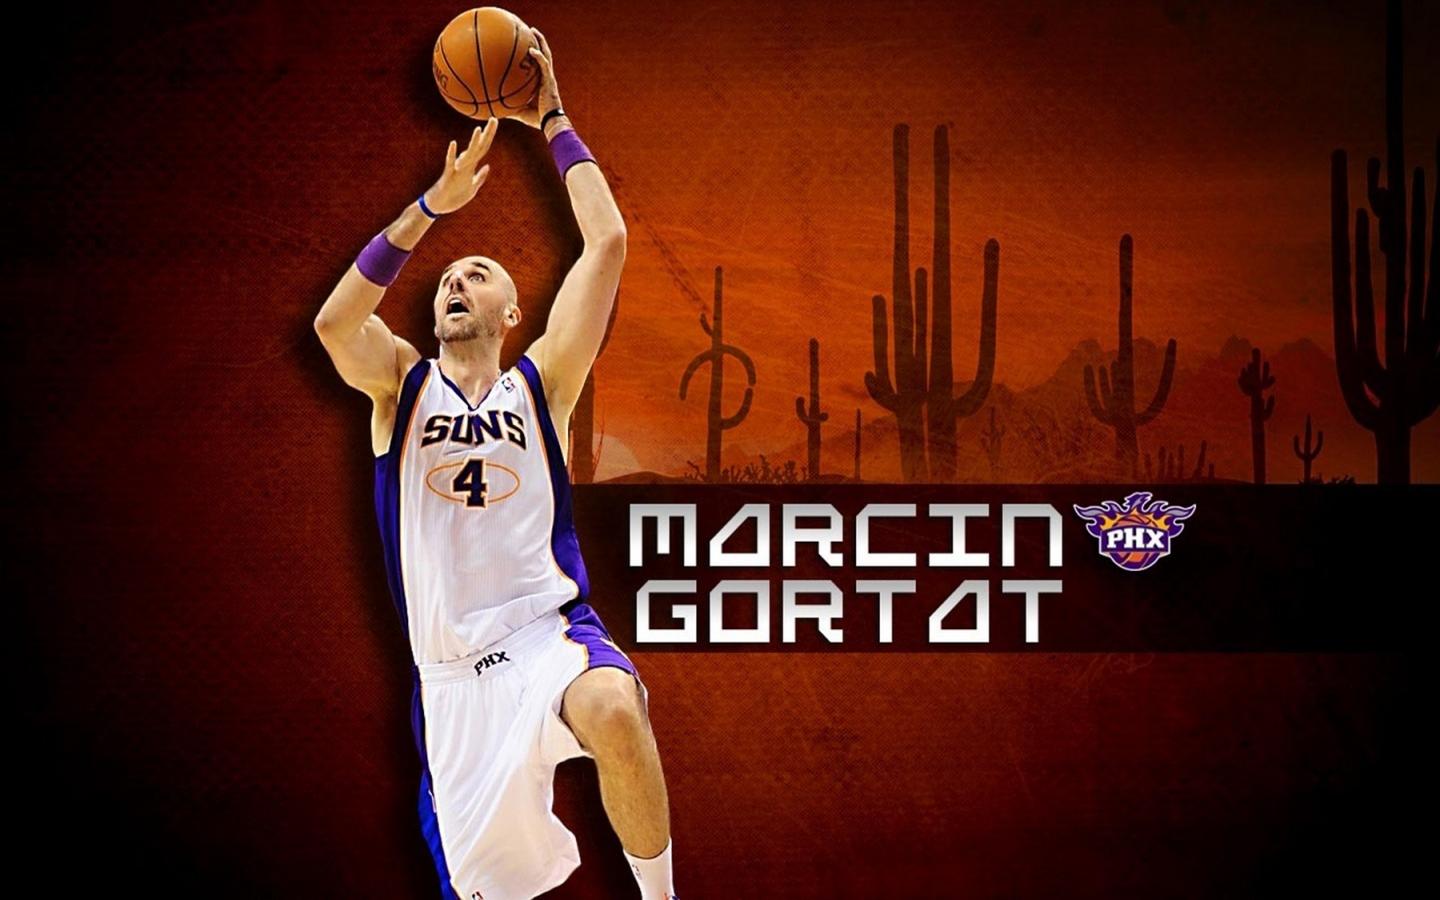 Marcin Gortat Phx Wallpaper And Background Image Id